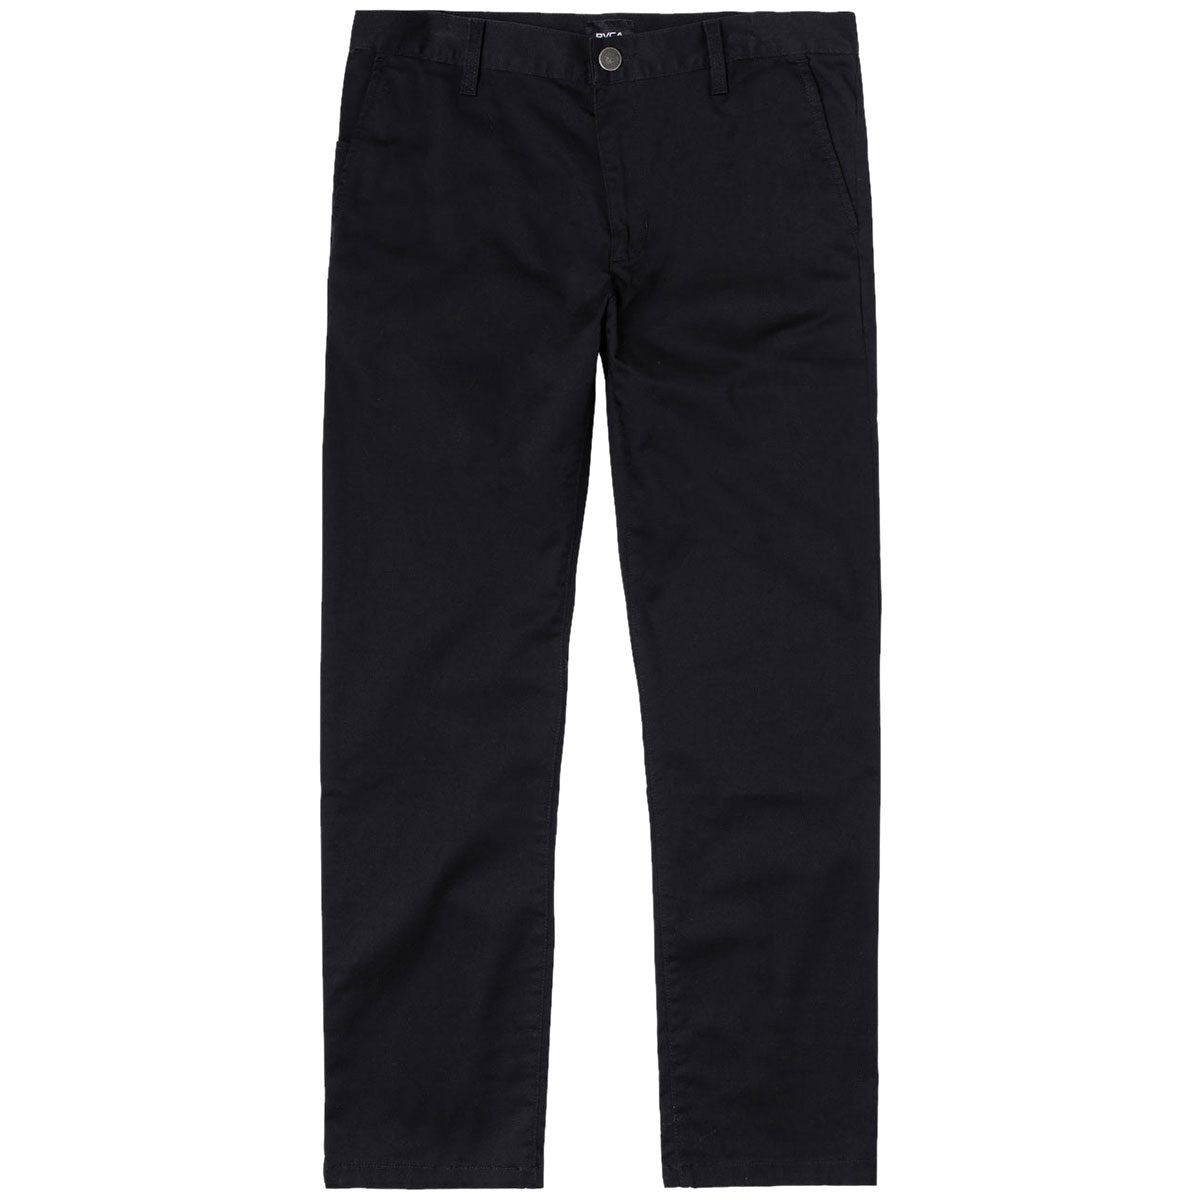 RVCA The Weekend Stretch Pants - New Black image 5